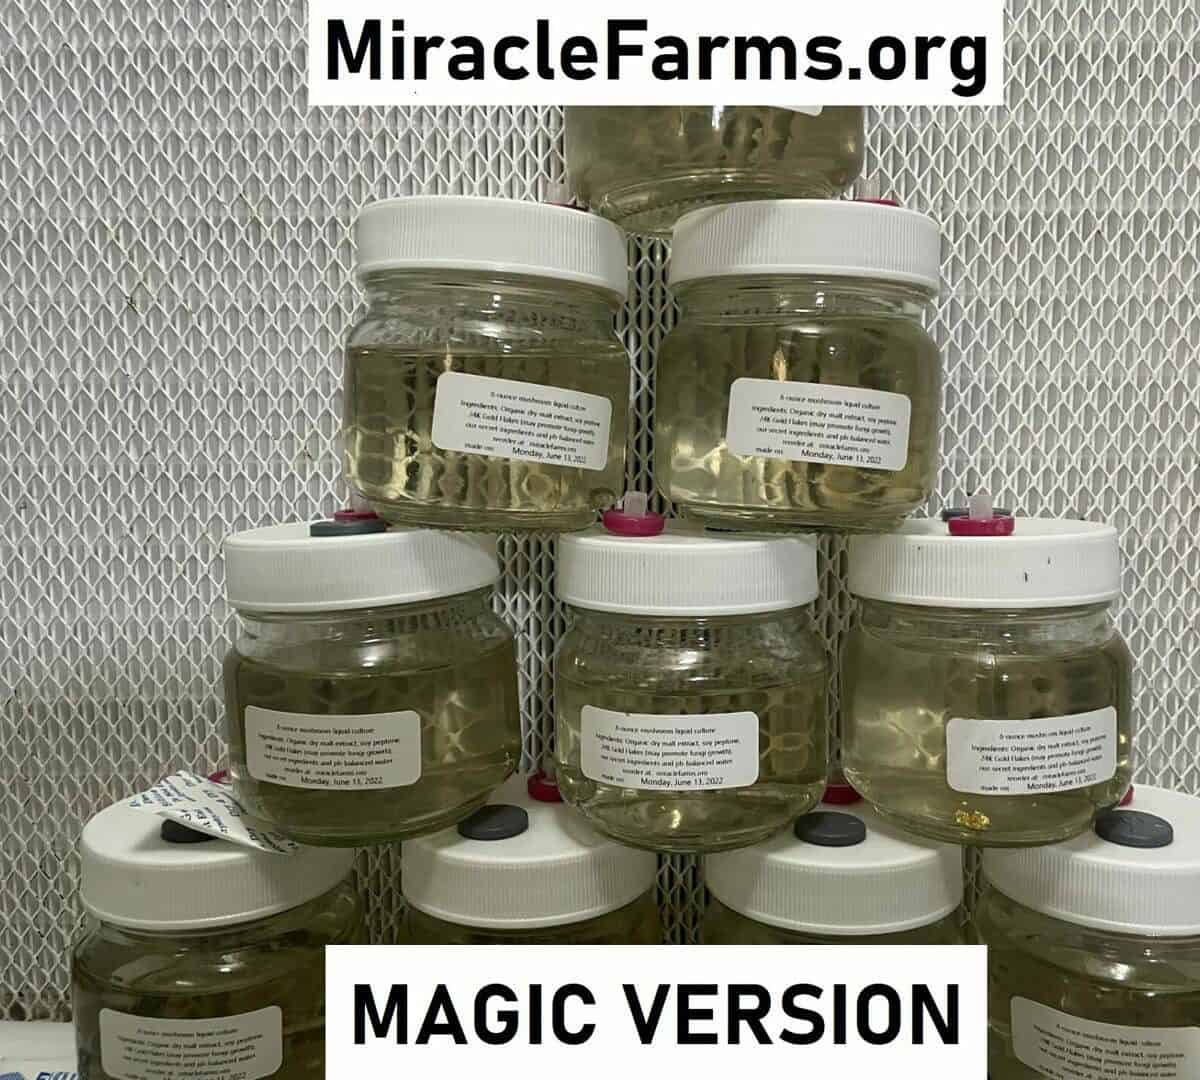 8oz Liquid Mushroom Culture jars with 24K gold infused nutrient broth designed specifically for cubes or magic mushroom strains made by hand sold only at miracle farms dot org IMG 2675